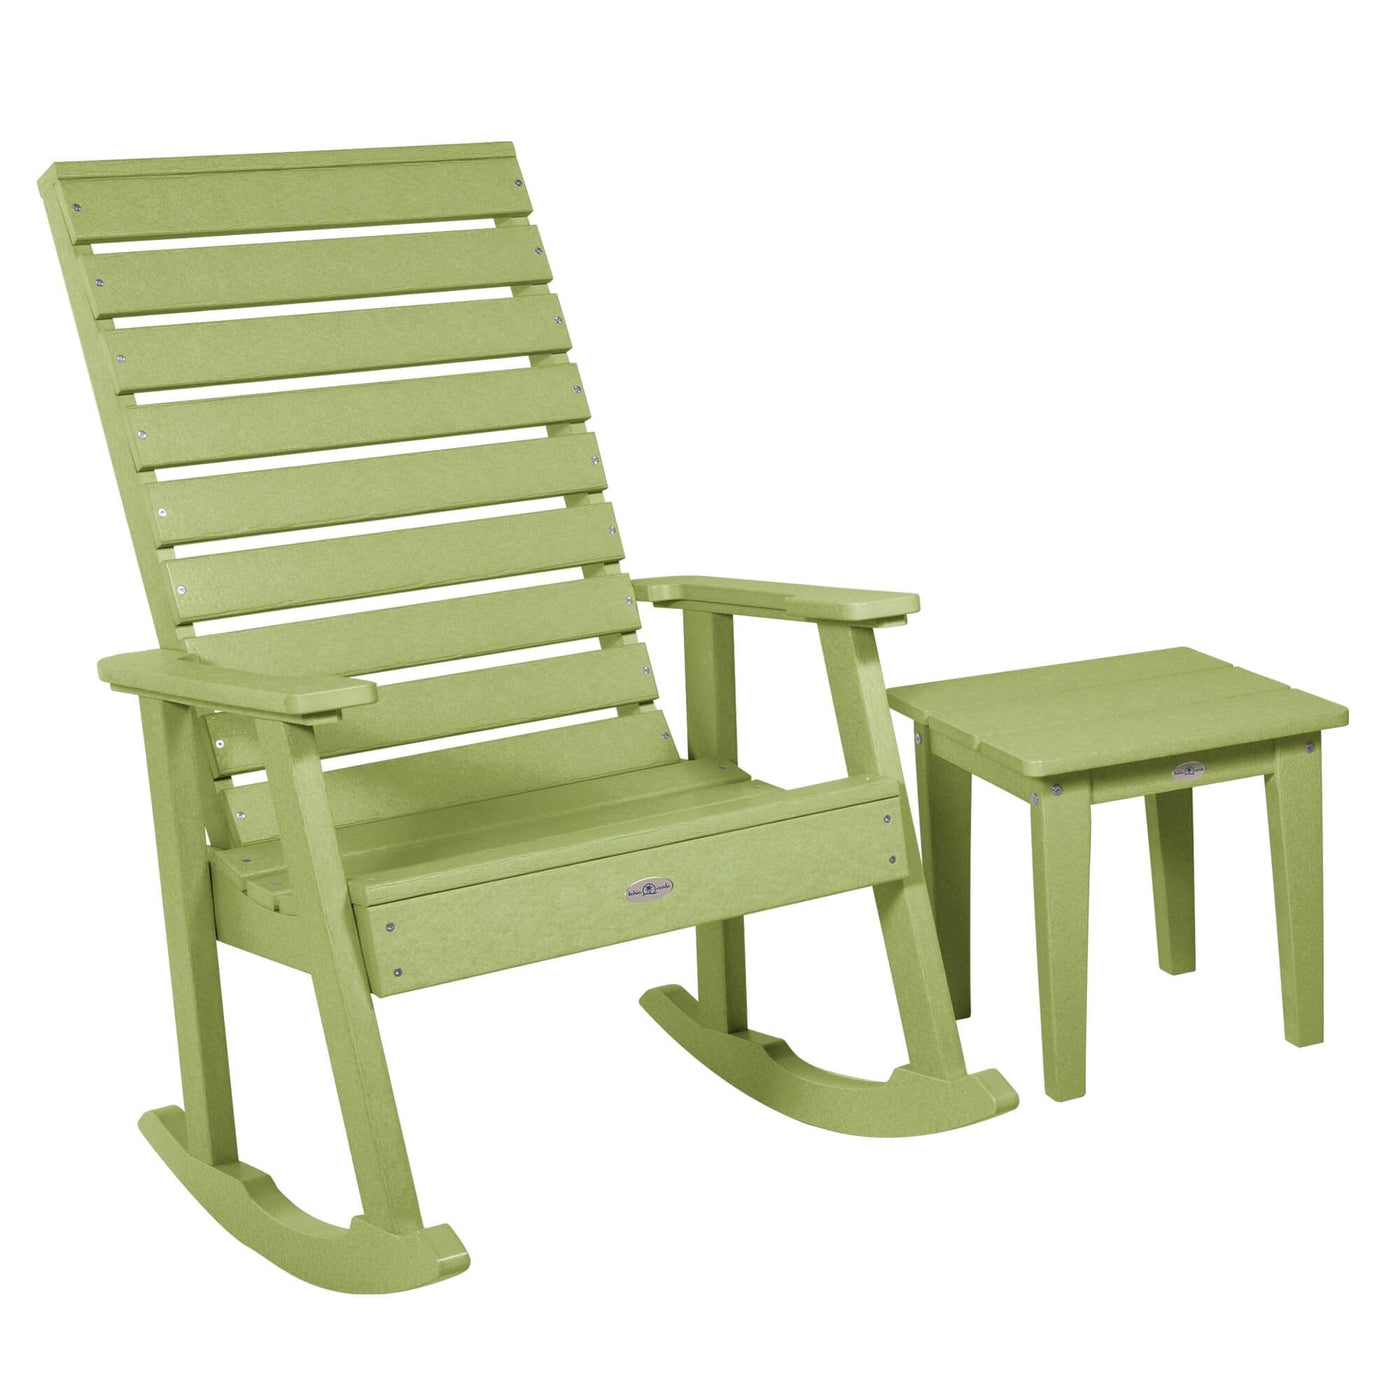 Riverside Rocking Chair and Side Table 2pc Set Kitted Set Bahia Verde Outdoors Palm Green 